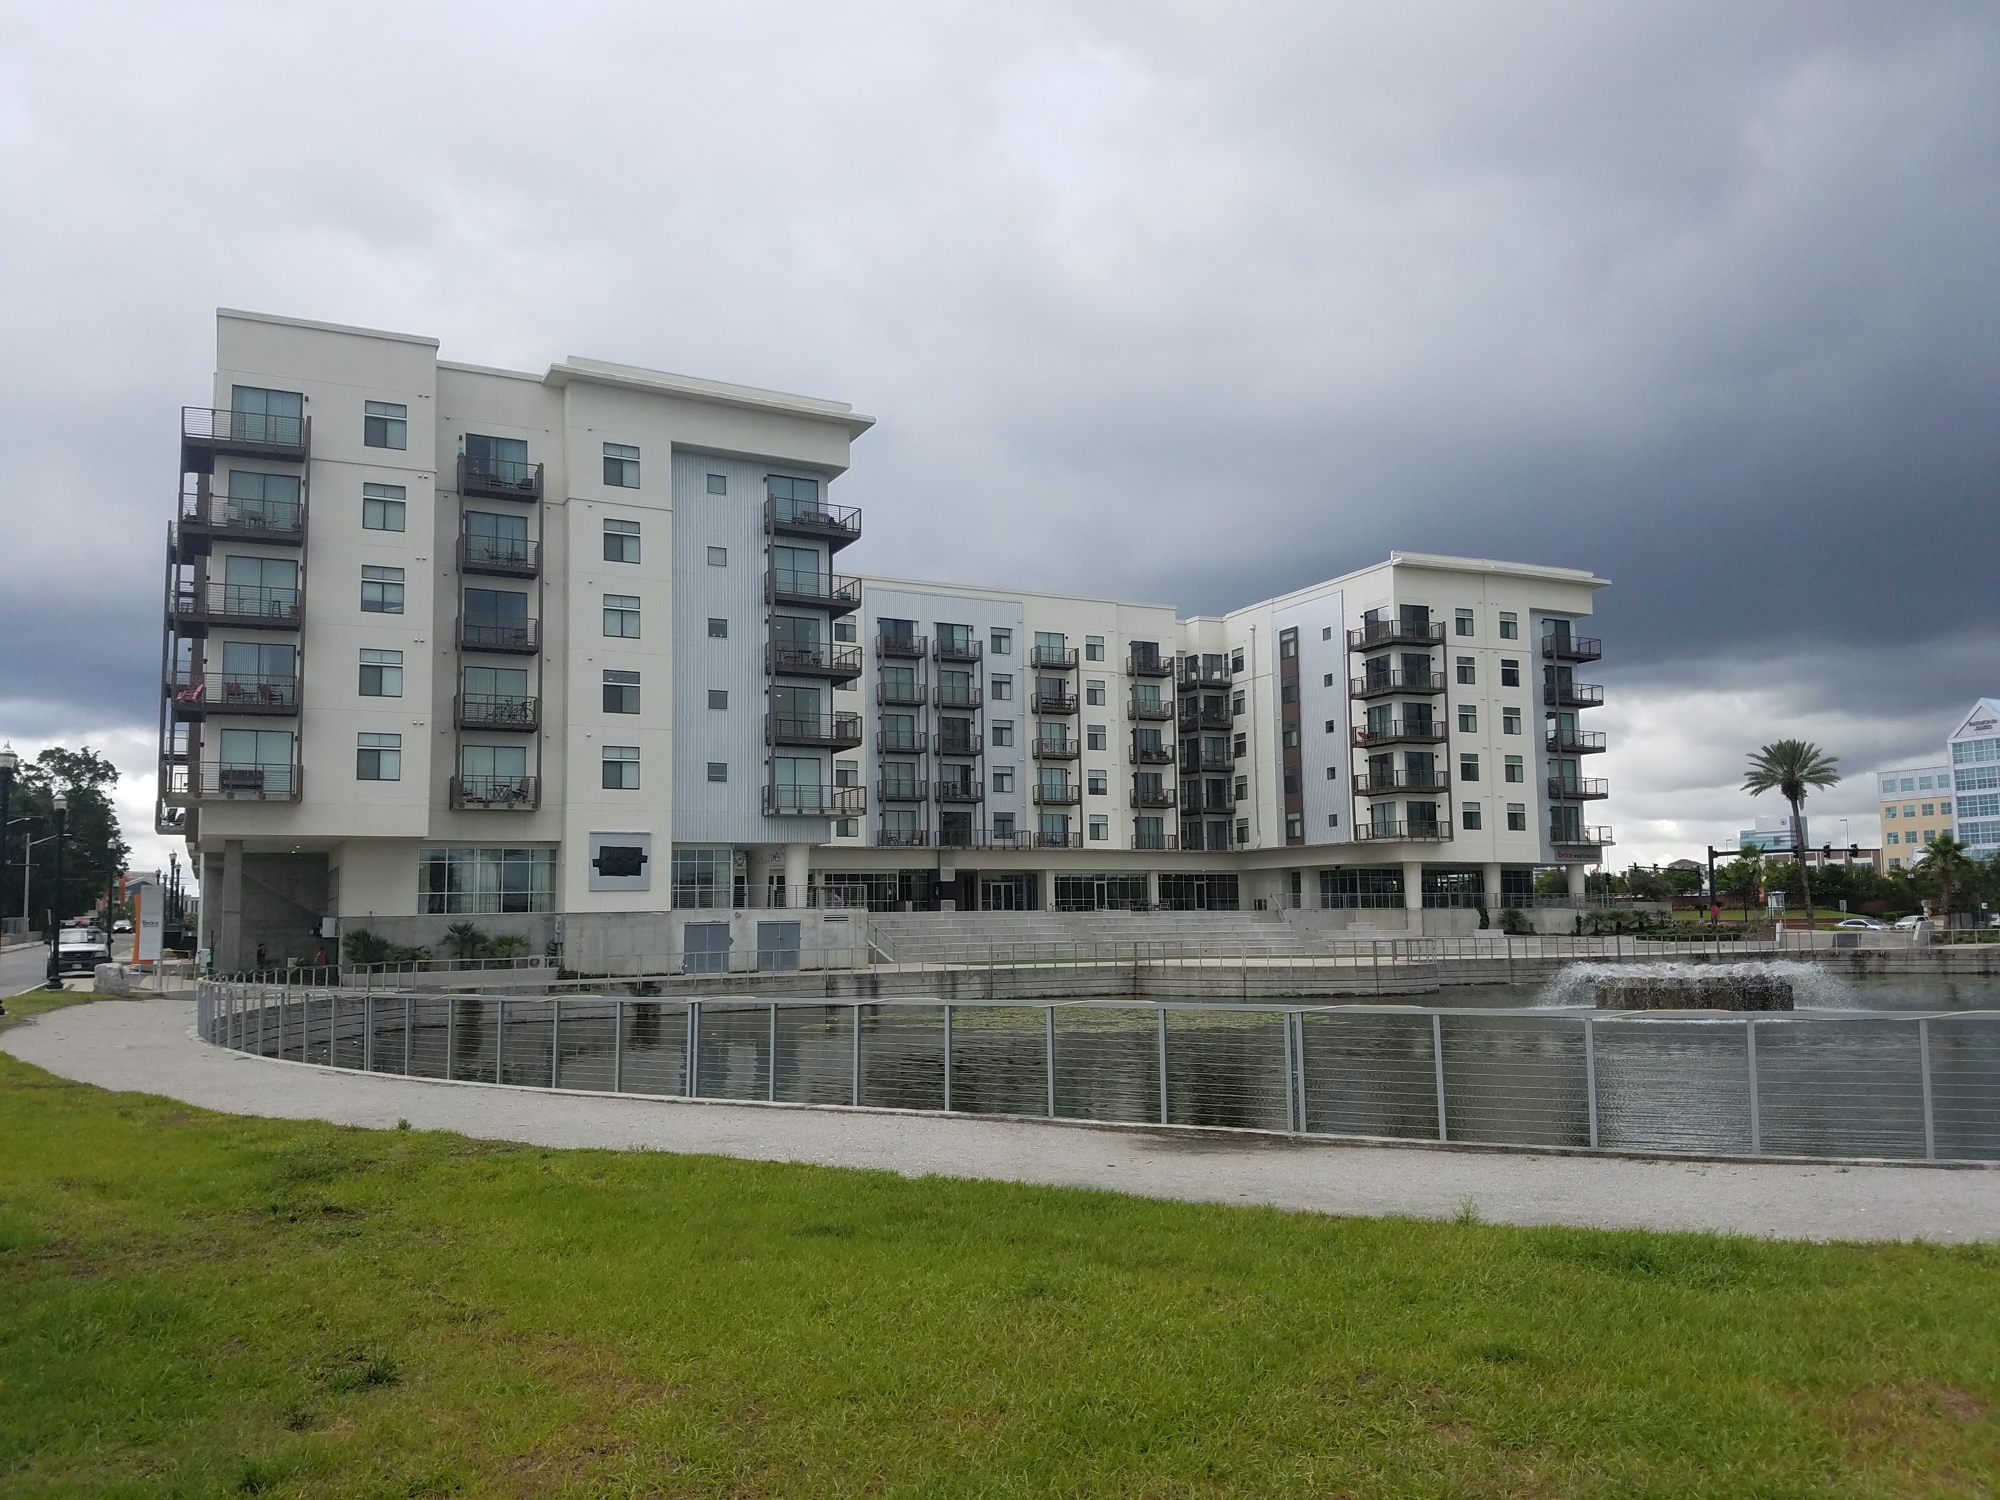 Unity Plaza sits below 220 Riverside apartments and overlooks a water feature.